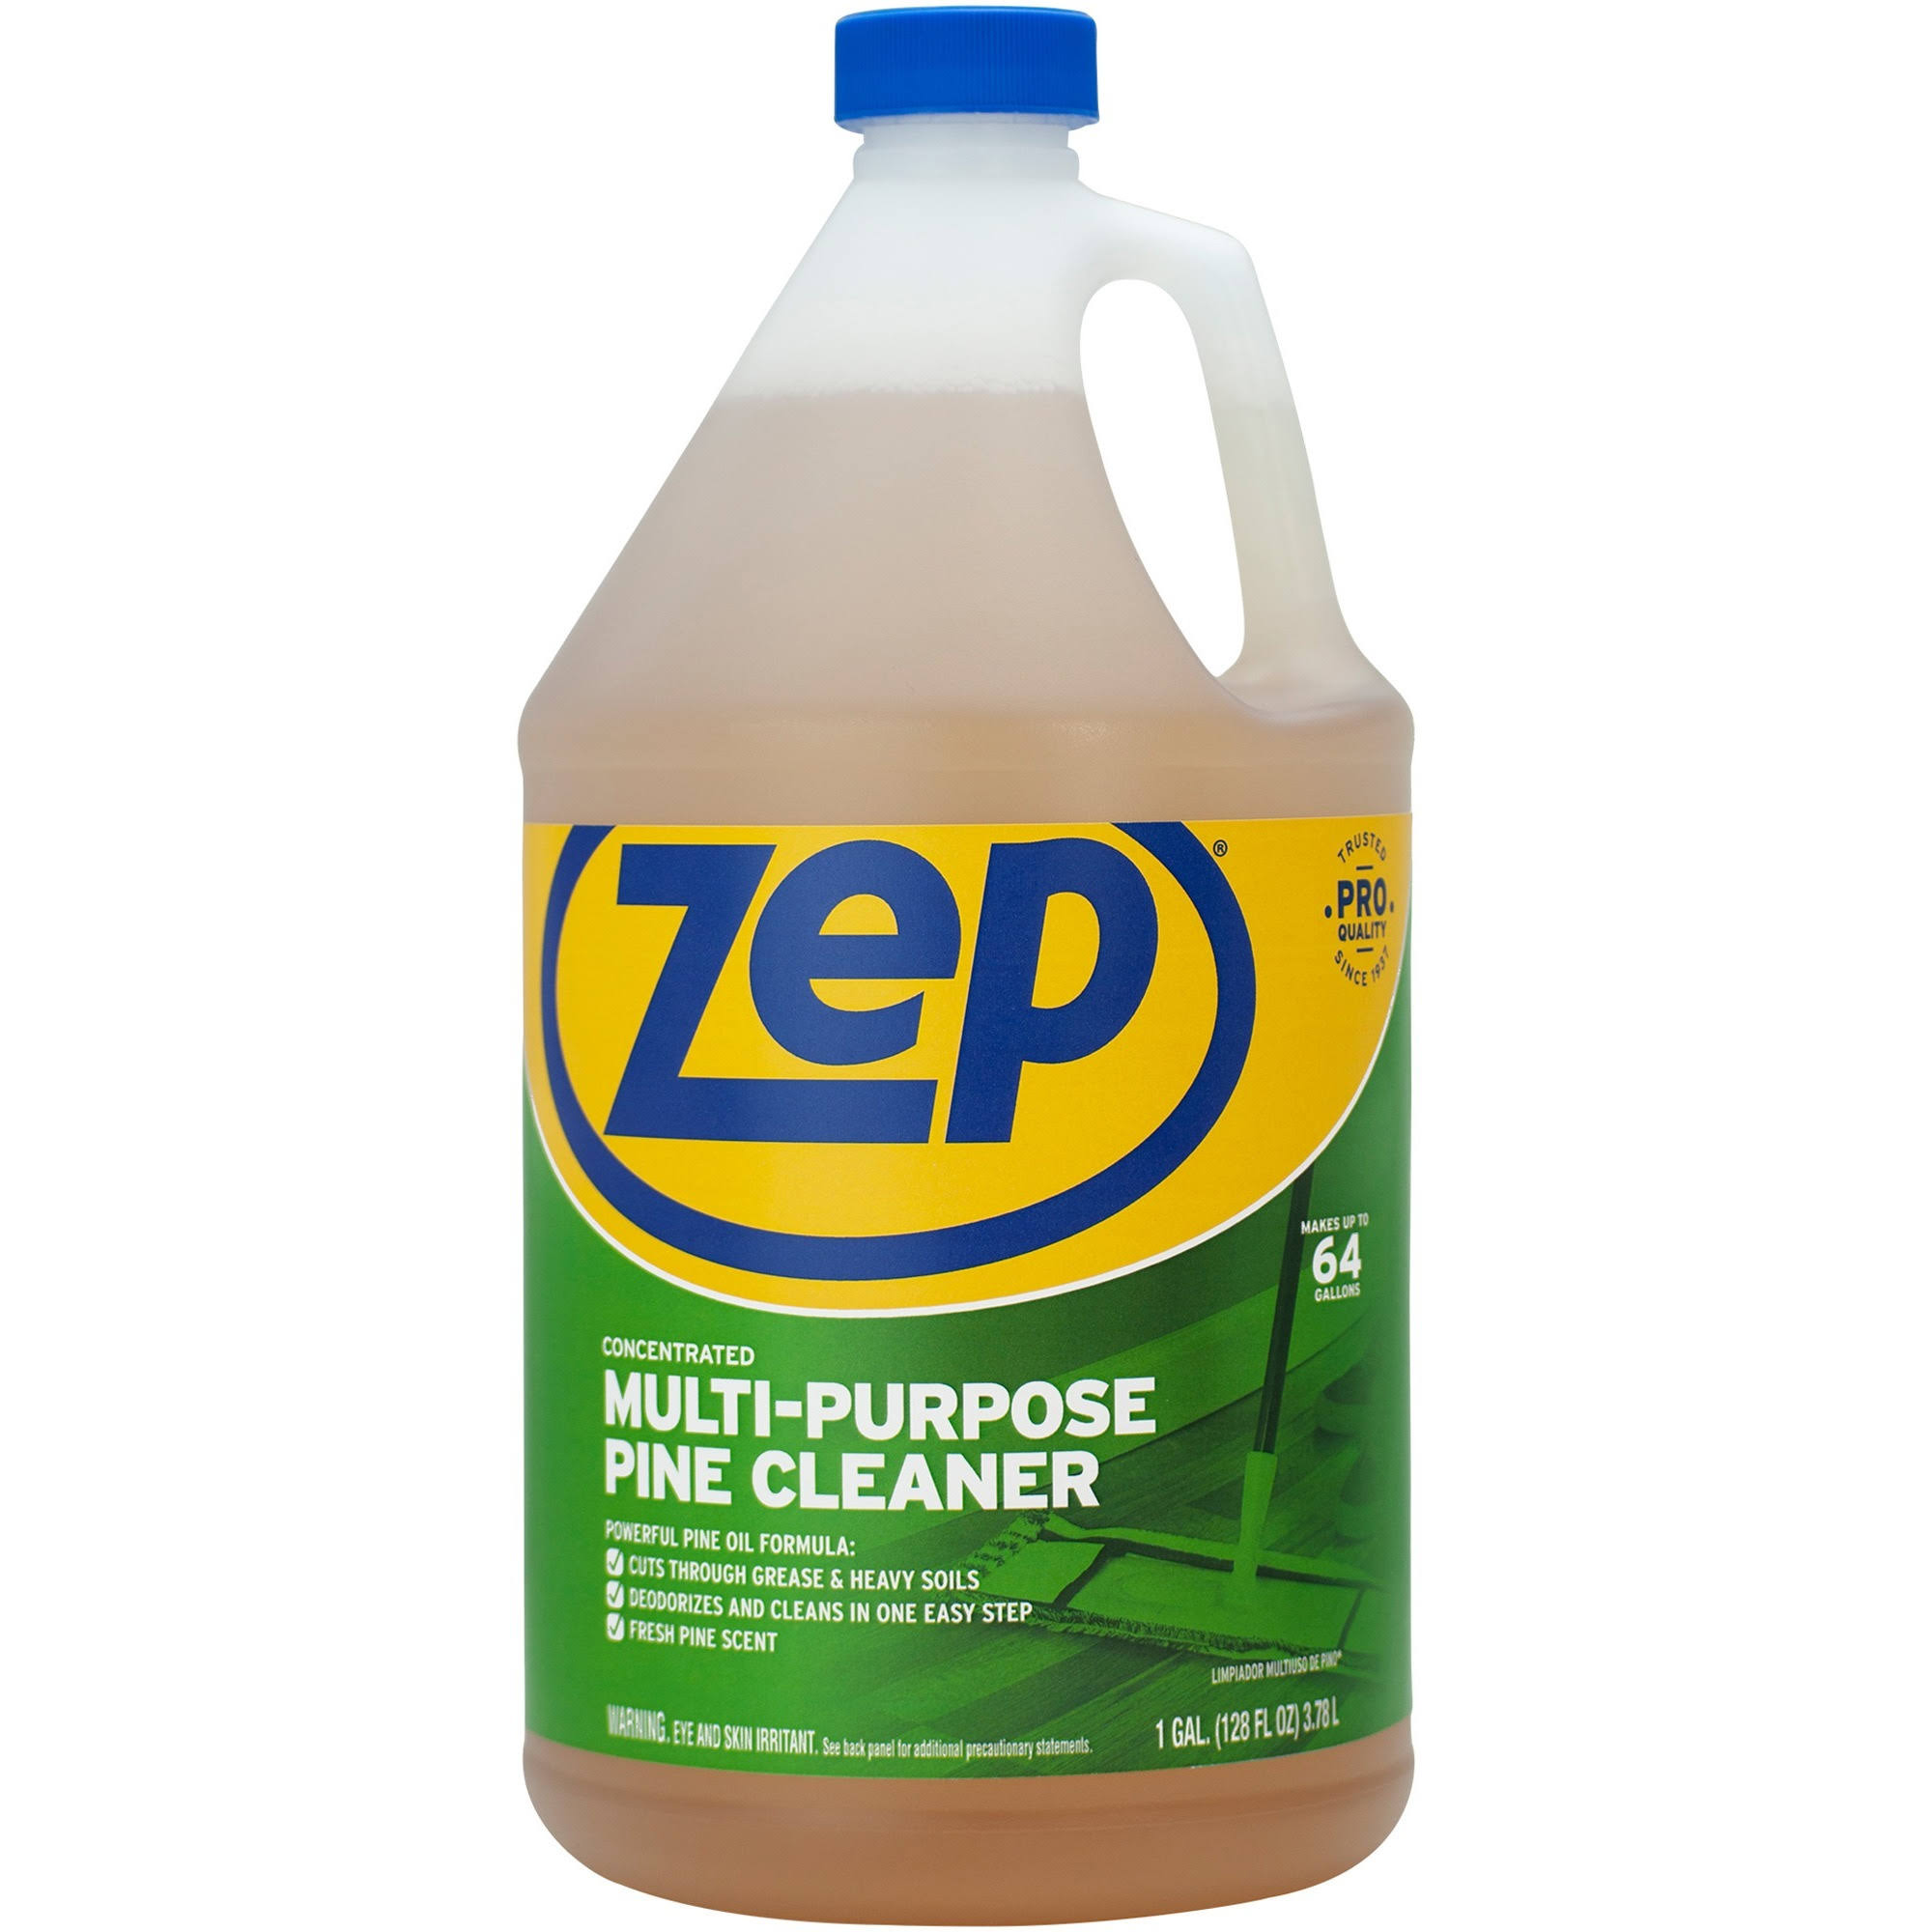 Zep Commercial Pine Multi-Purpose Cleaner - 1 gal